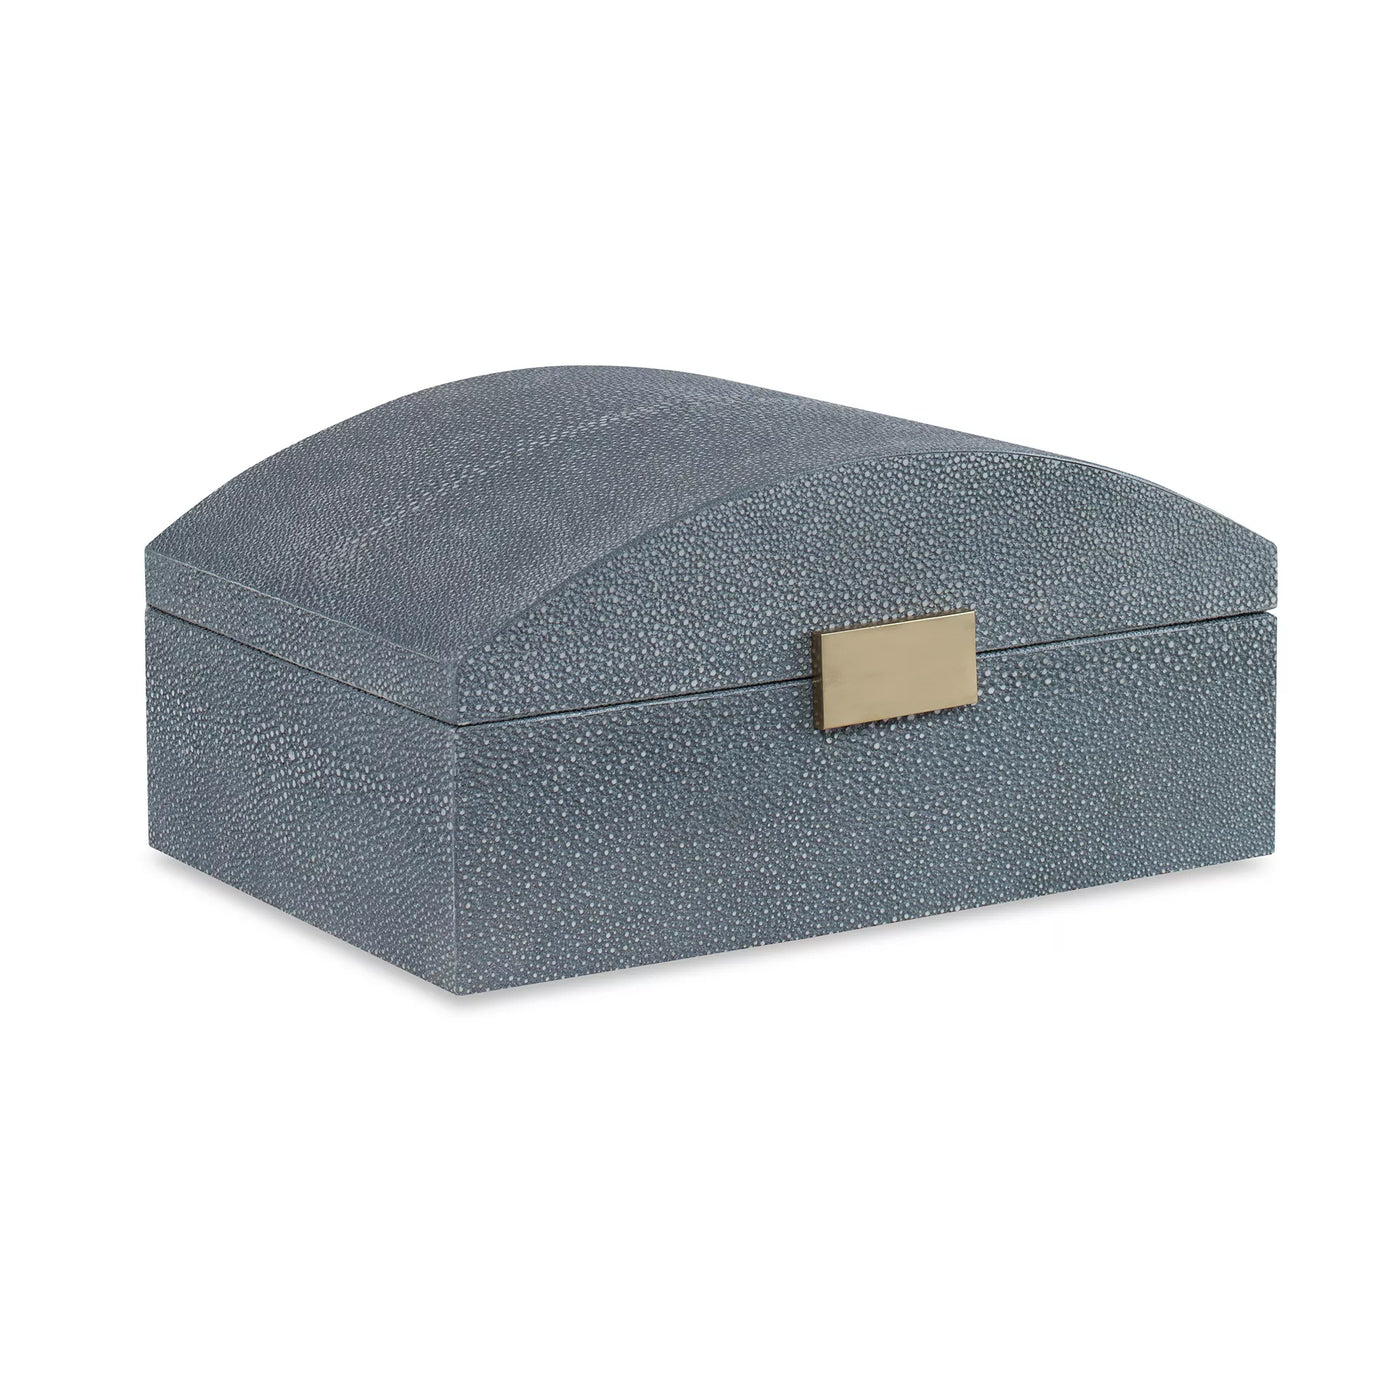 BOX ARCHED FAUX SHAGREEN GRAY